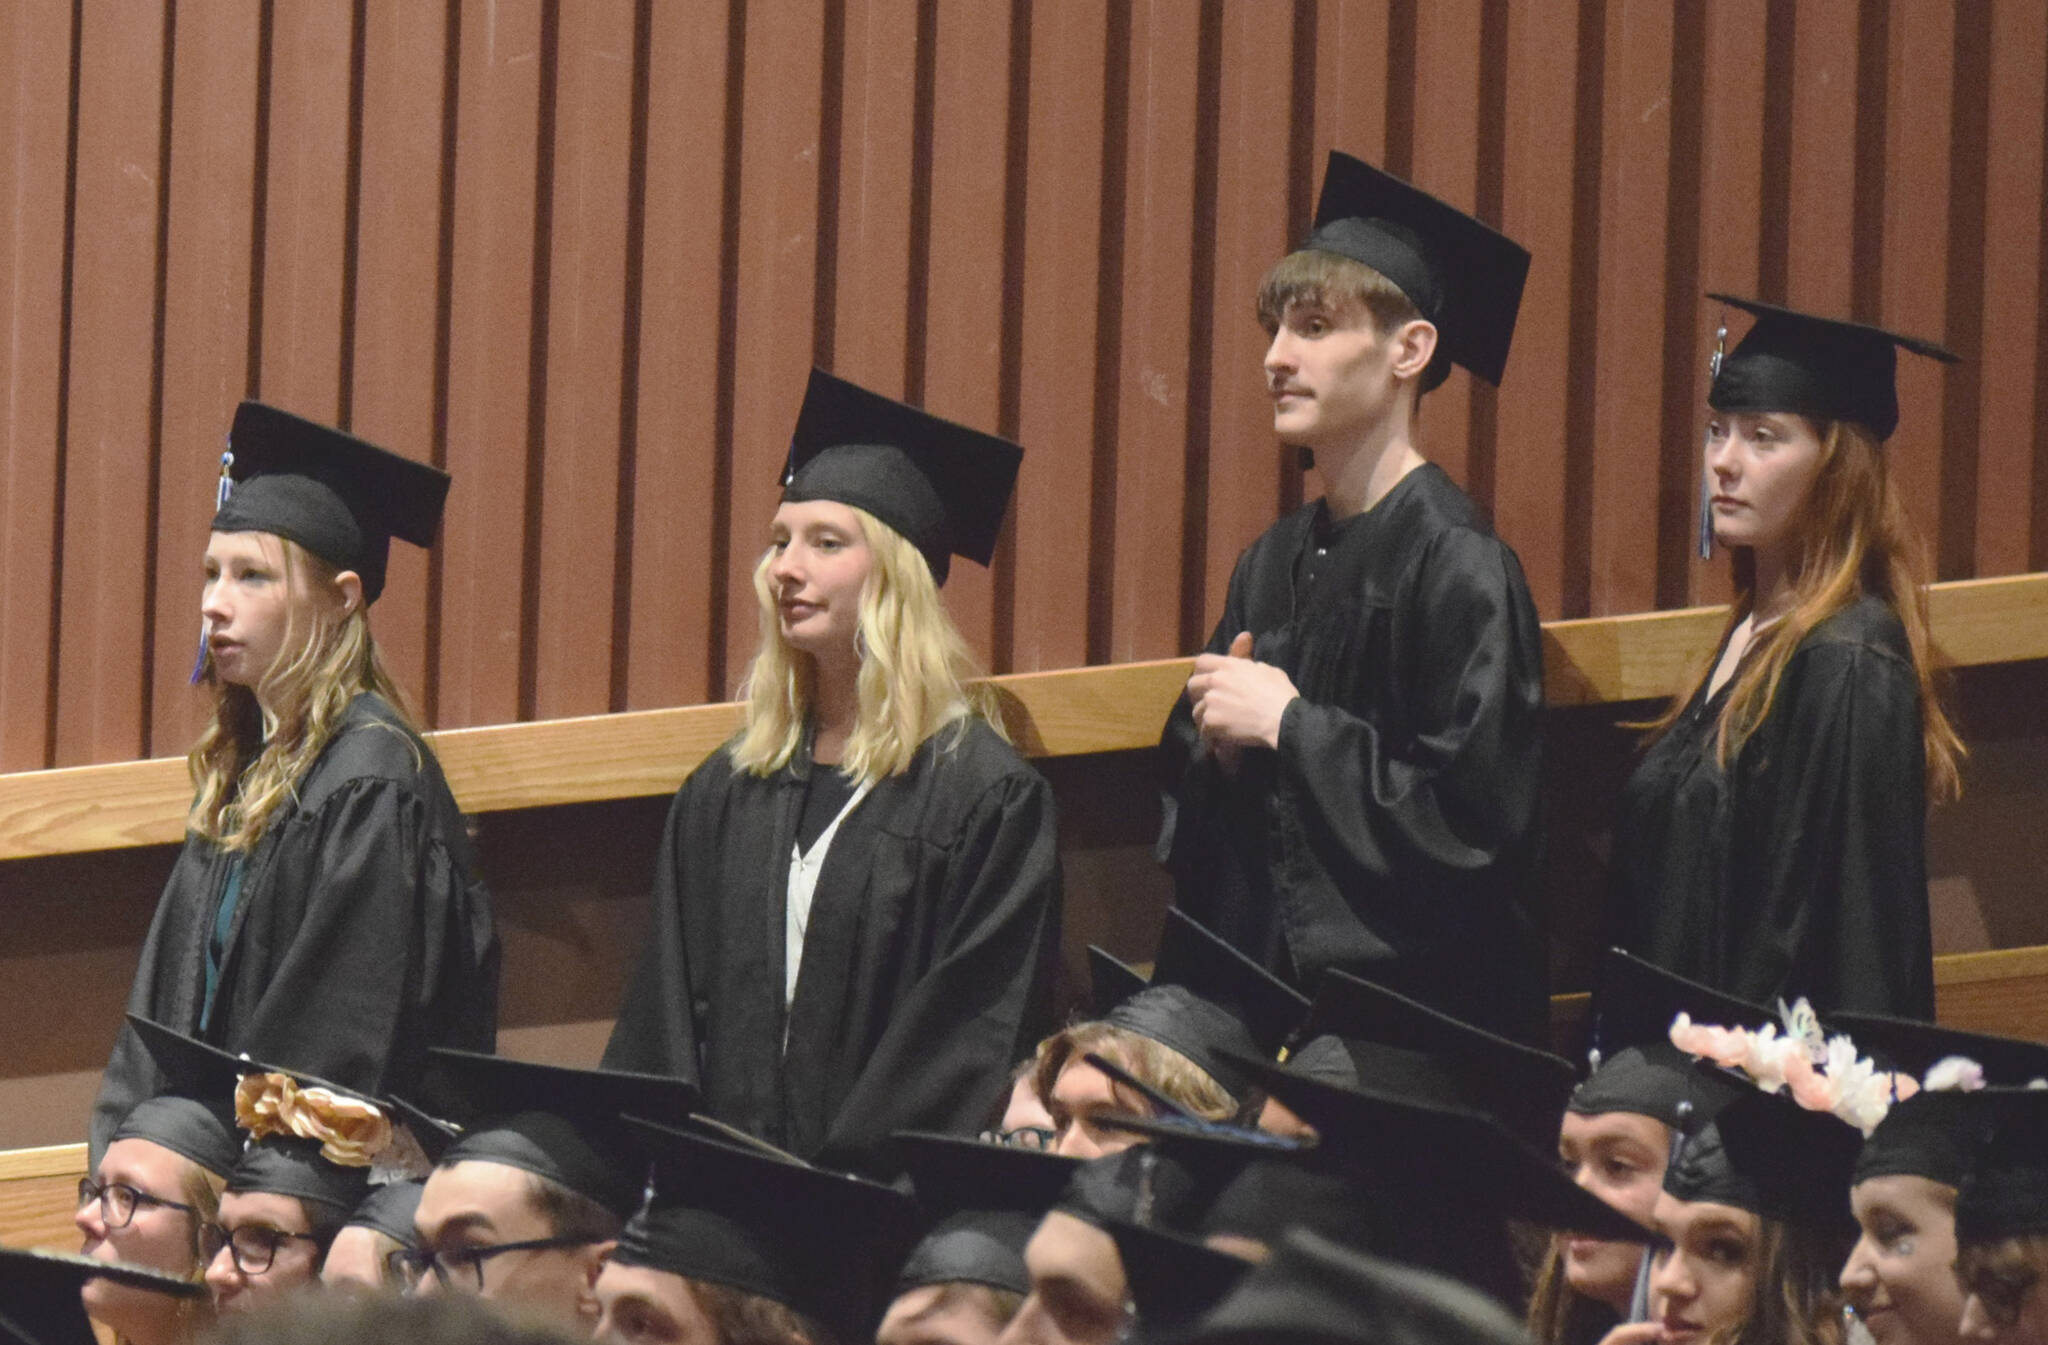 Graduates wait to receive diplomas during Connections Homeschool’s commencement ceremony on Thursday, May 19, 2022, in Soldotna, Alaska. (Ashlyn O’Hara/Peninsula Clarion)